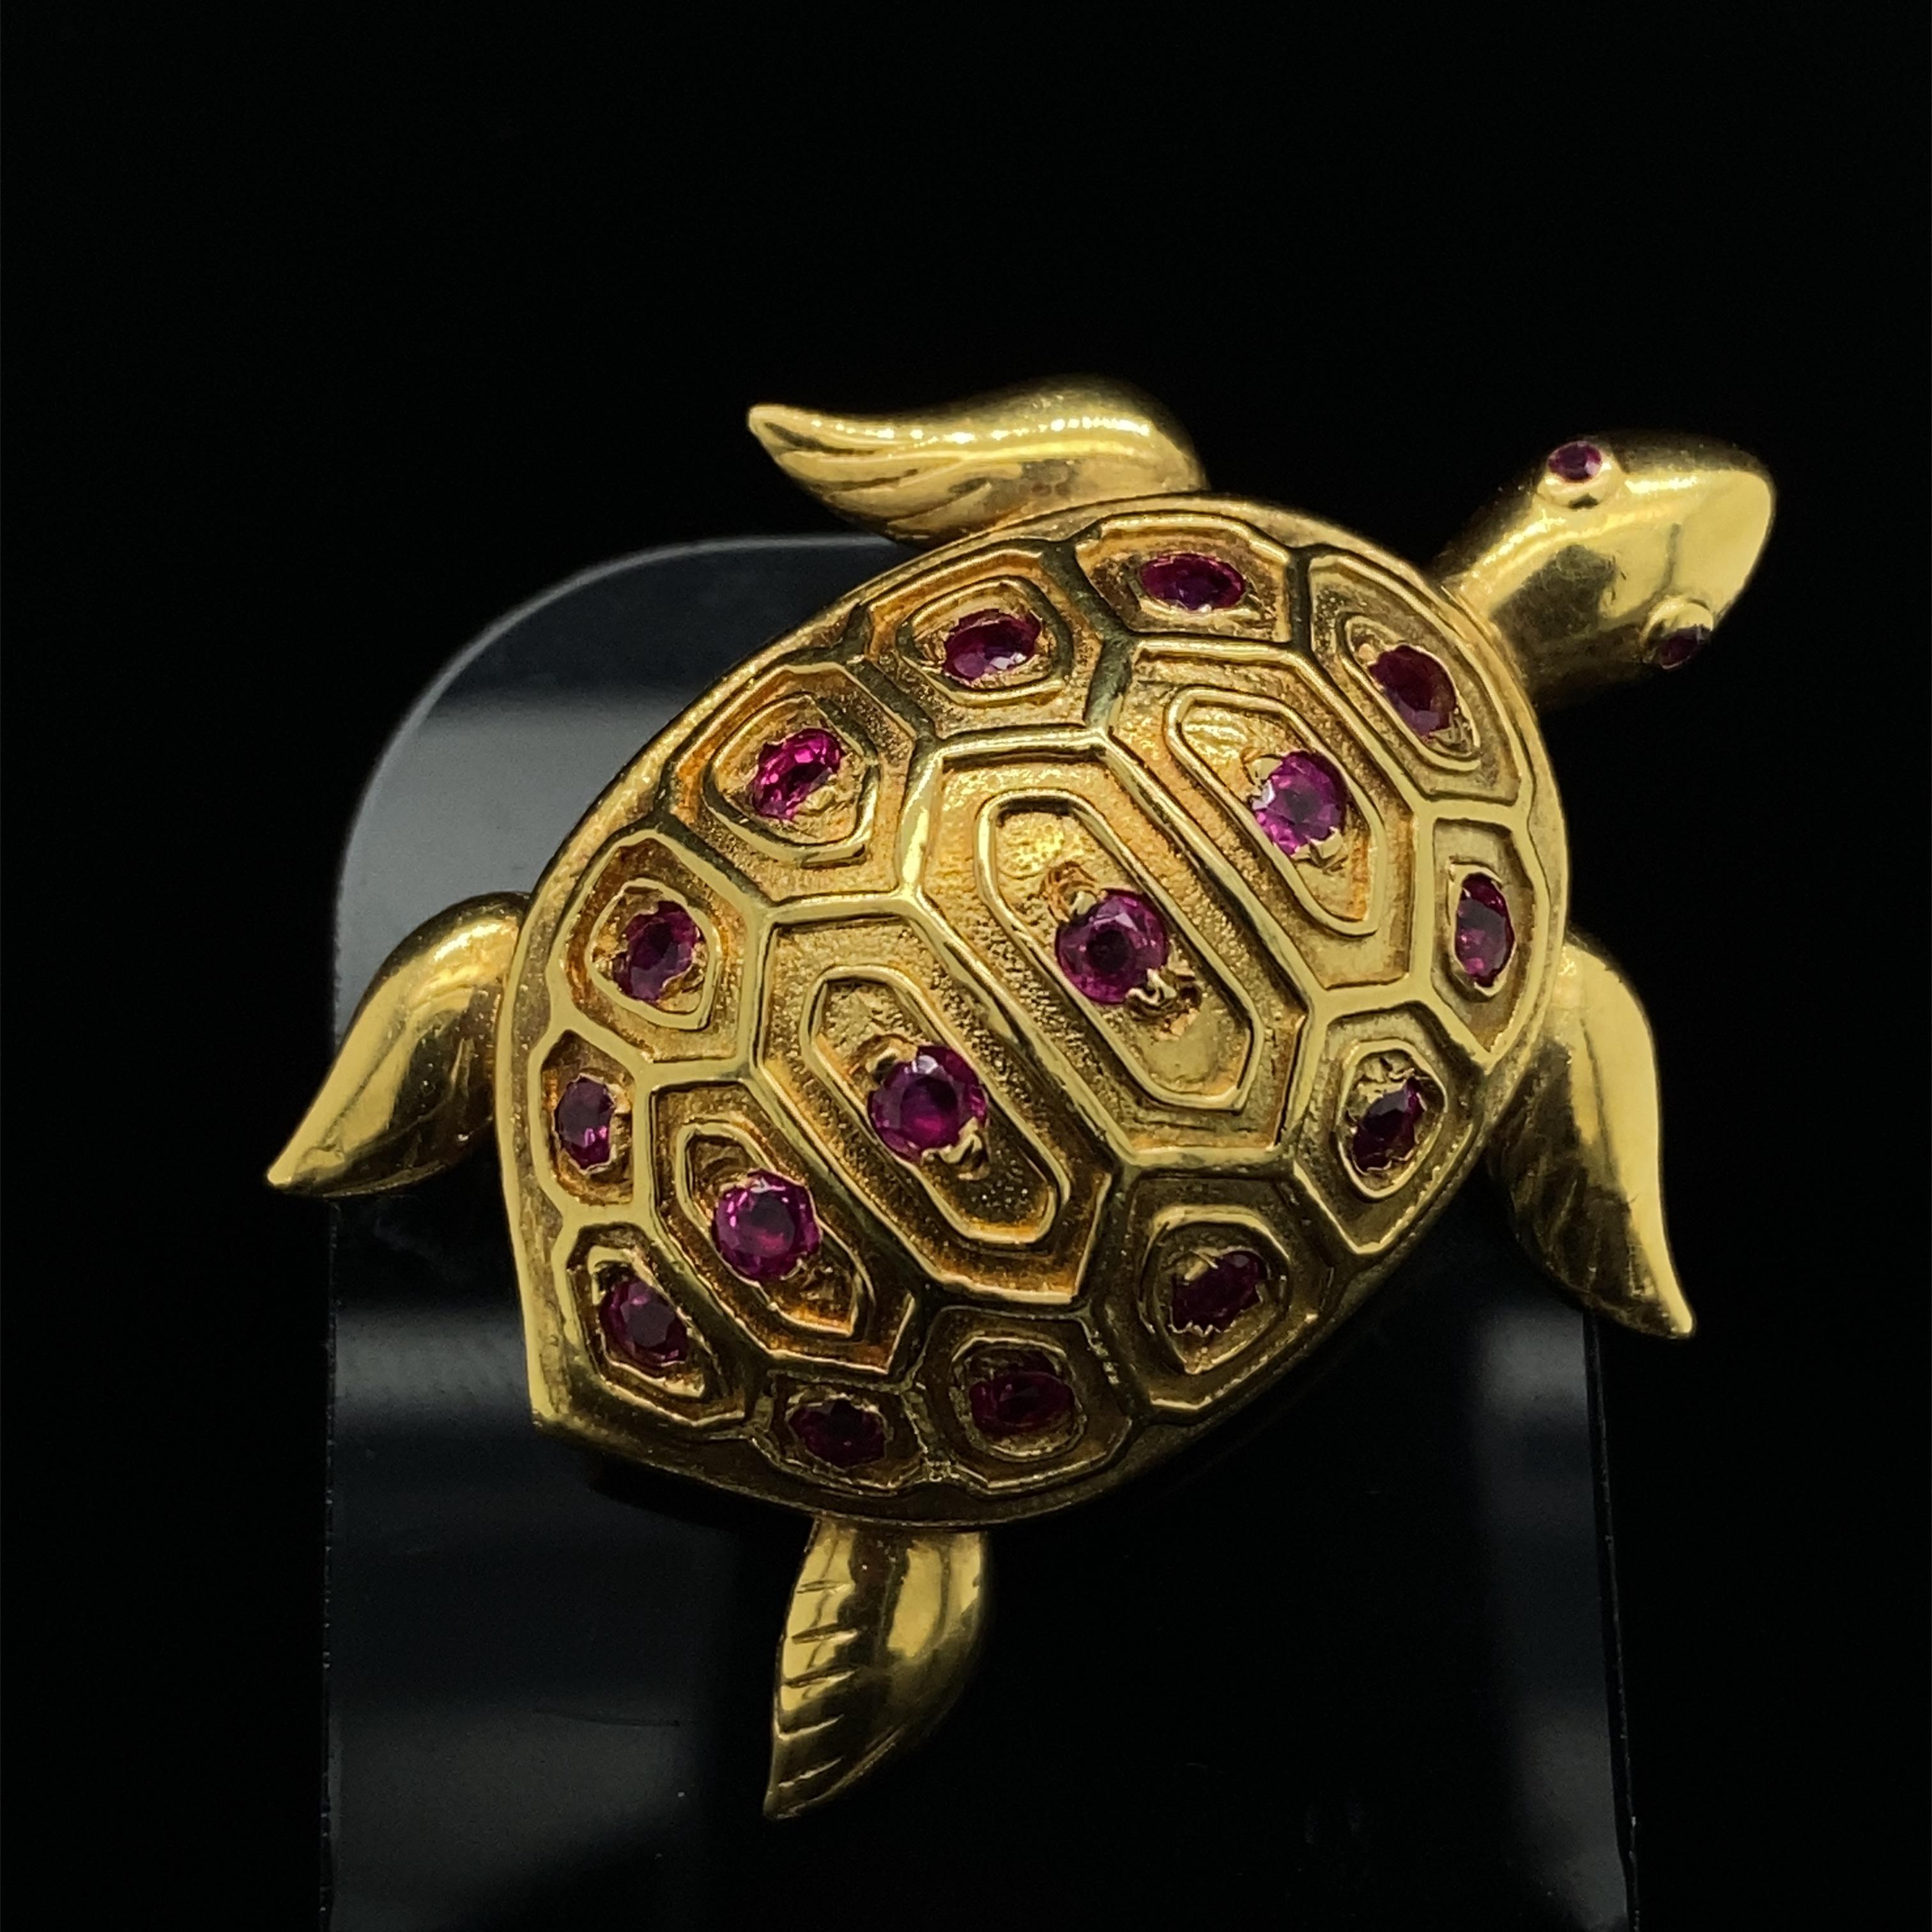 An elegant 18 Karat Yellow Gold turtle brooch crafted by Tiffany & Co, circa 1960.

This vintage turtle pin brooch is highly collectible. Its shell features a hand engraved design grain set with 16 round cut rubies. His legs and arms have a